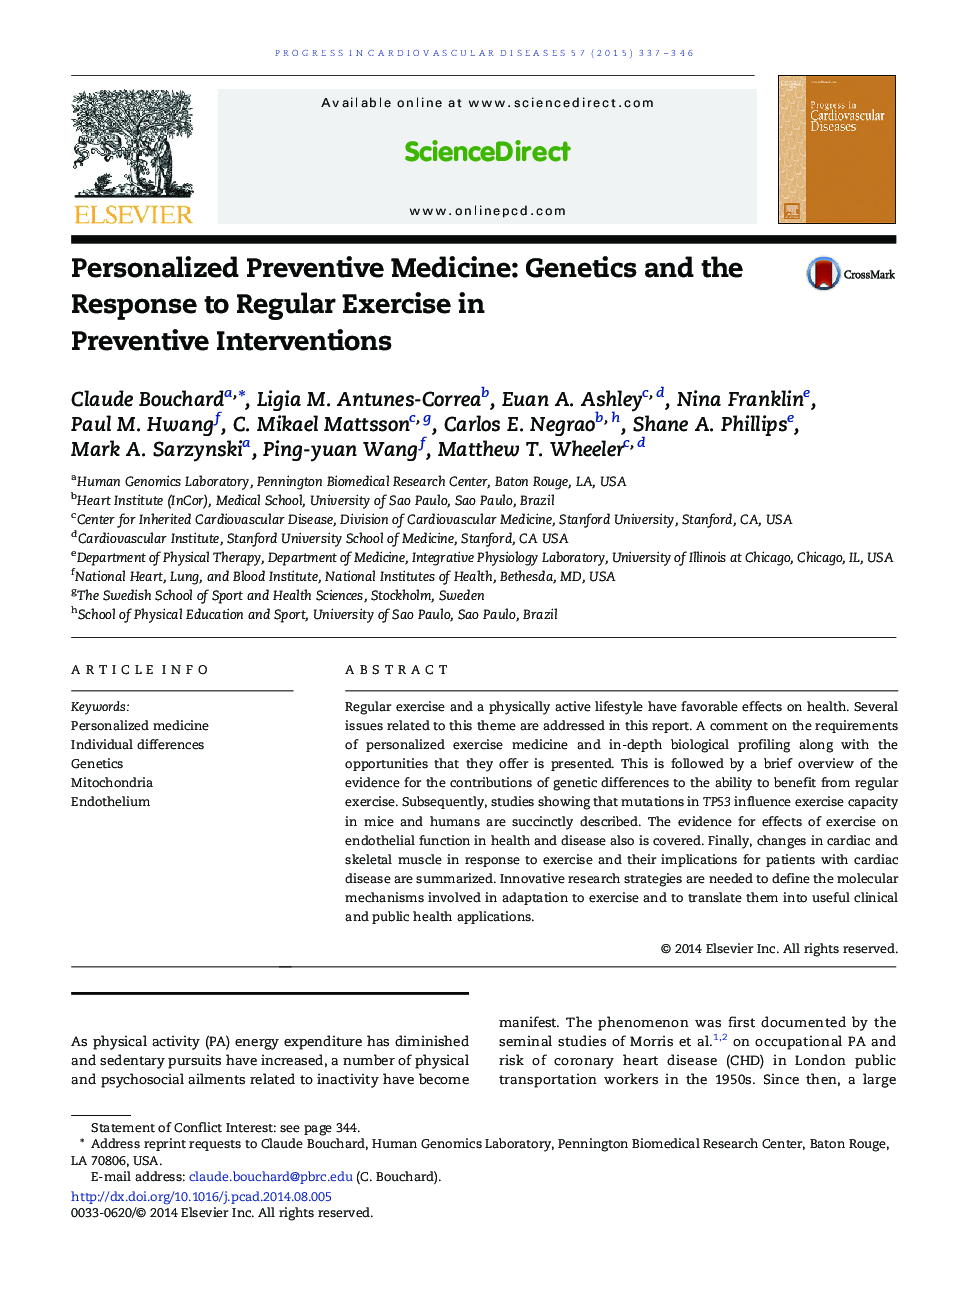 Personalized Preventive Medicine: Genetics and the Response to Regular Exercise in Preventive Interventions 